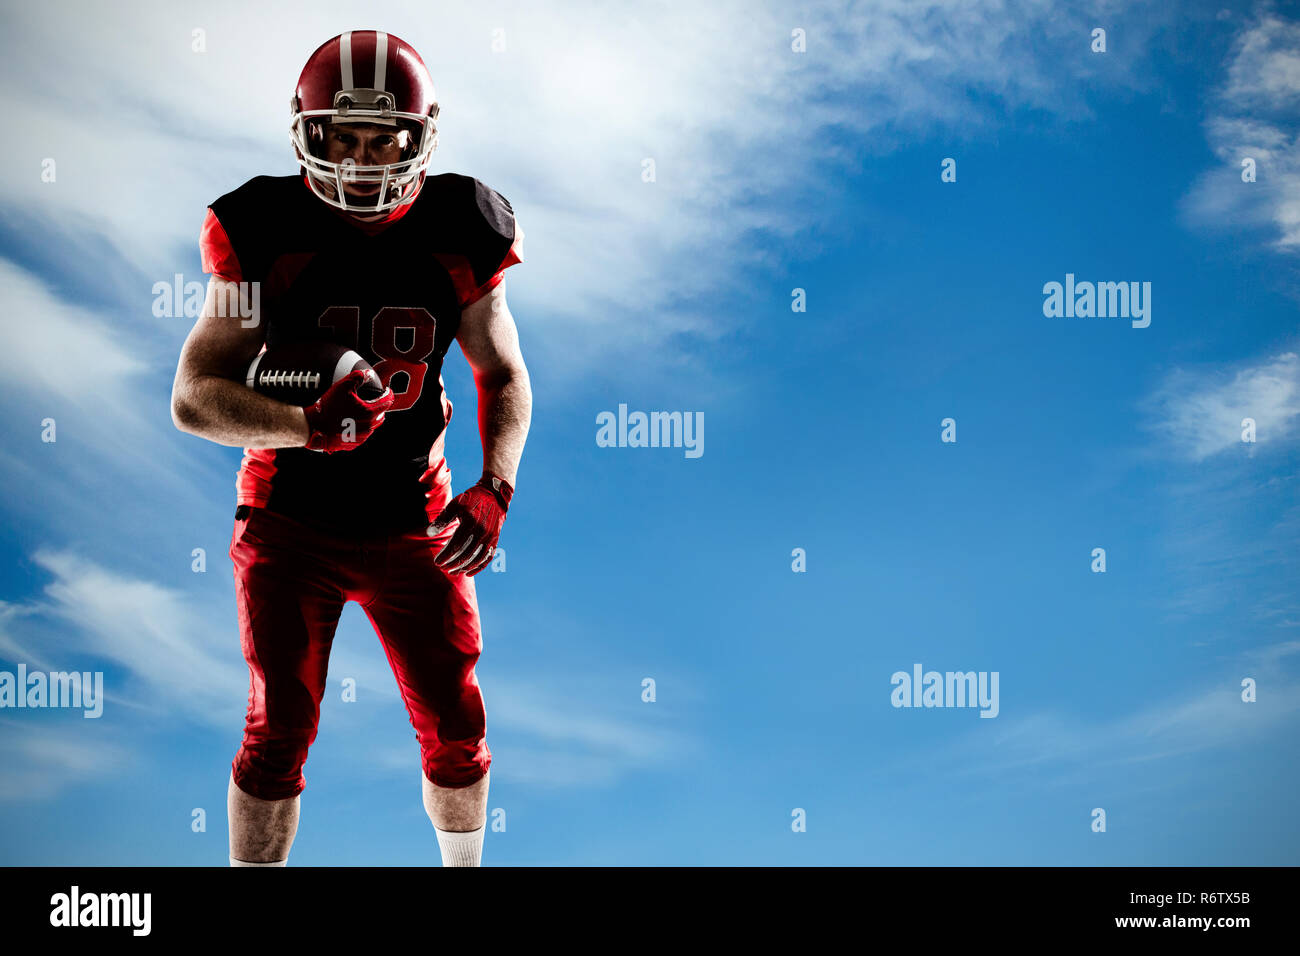 American football player standing with rugby ball and helmet against view of a blue sky Stock Photo